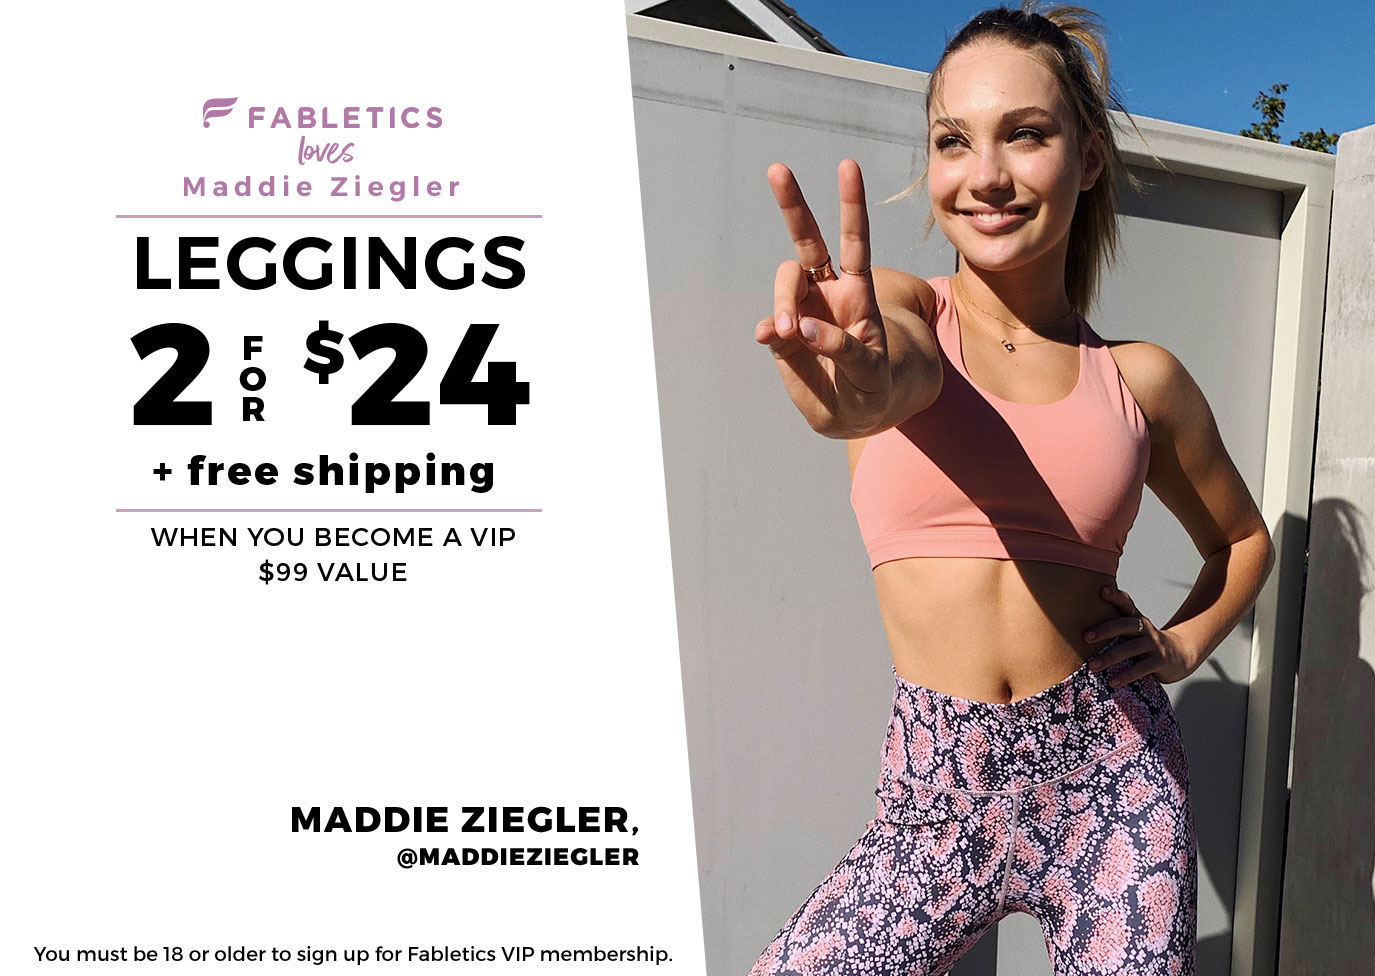 Fabletics - The June collection is also available